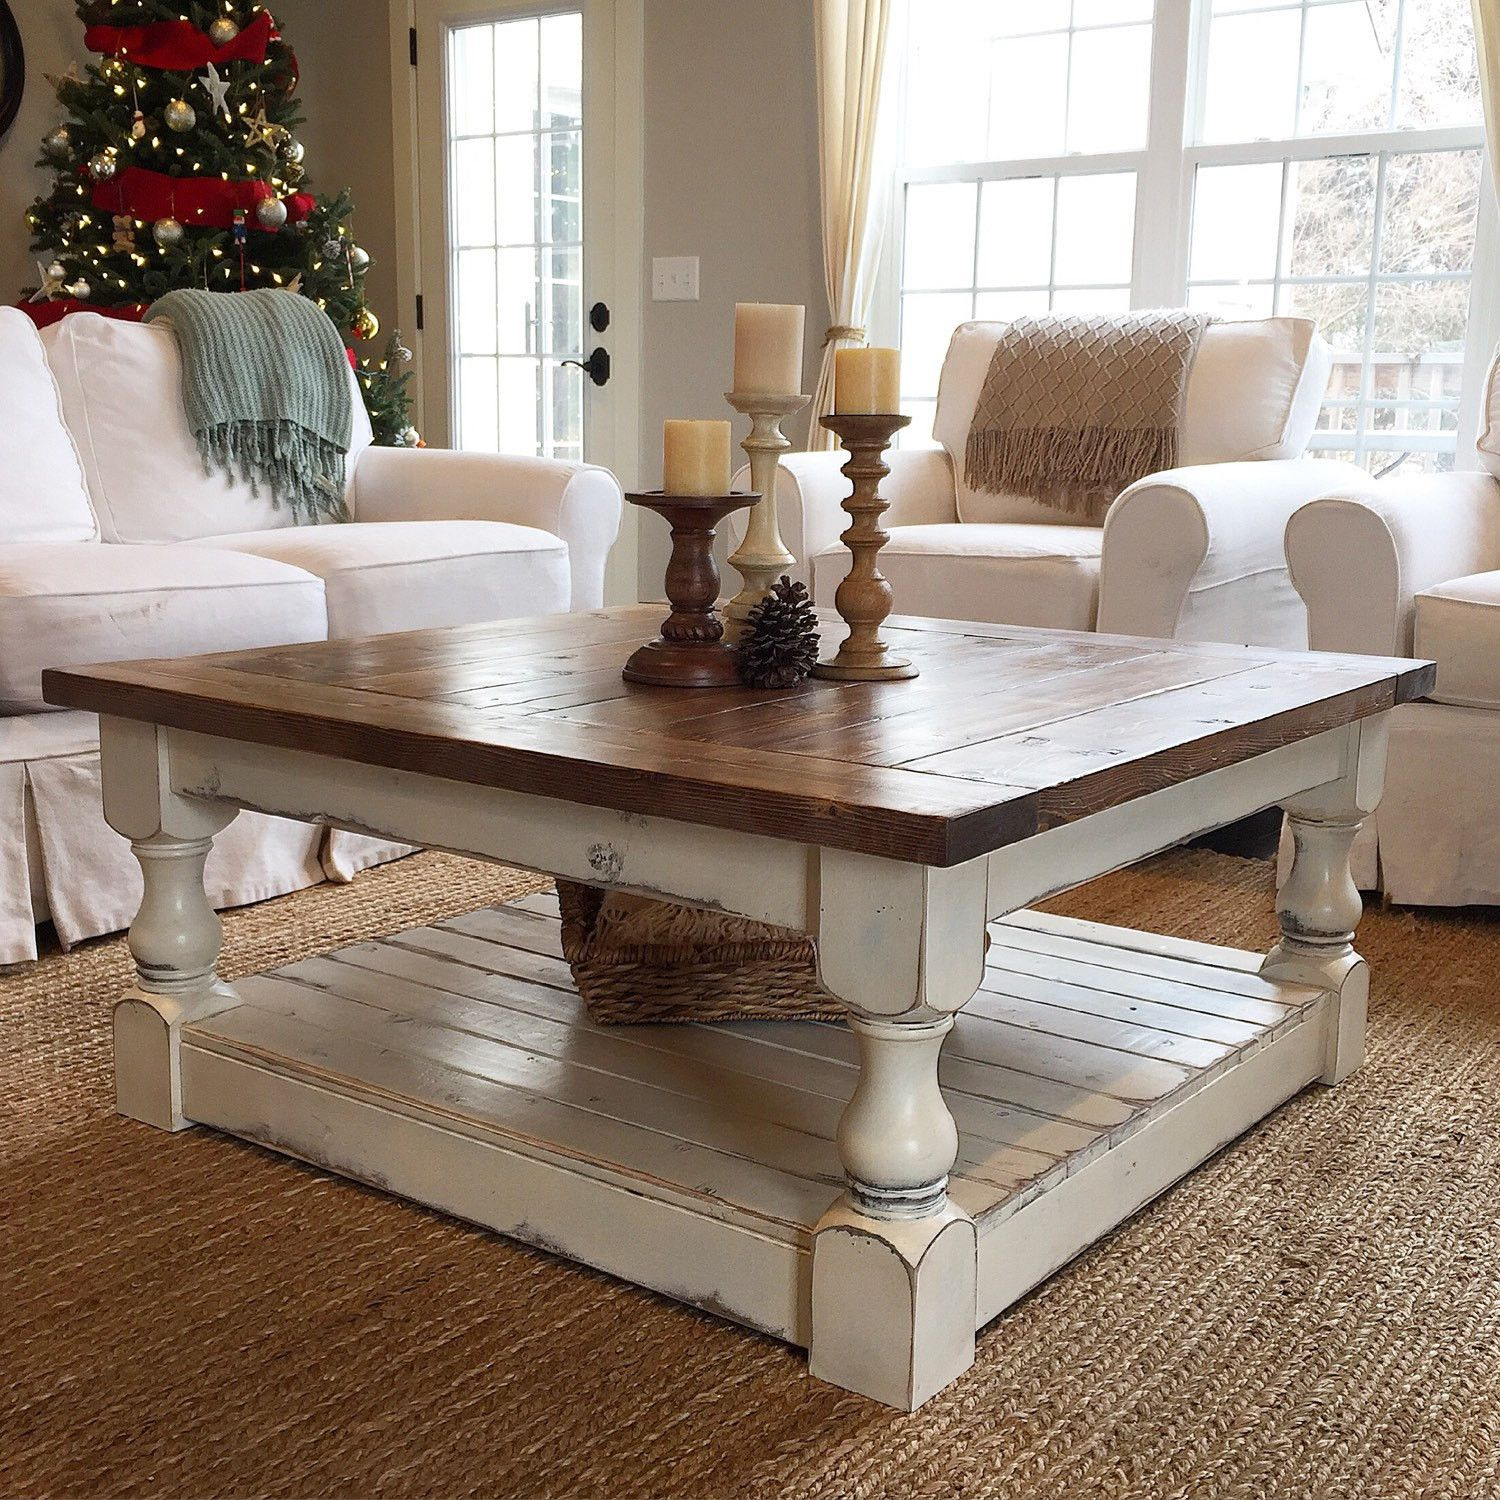 Farmhouse Harvest Table Nicholson Decorating Coffee Tables Home with regard to sizing 1500 X 1500